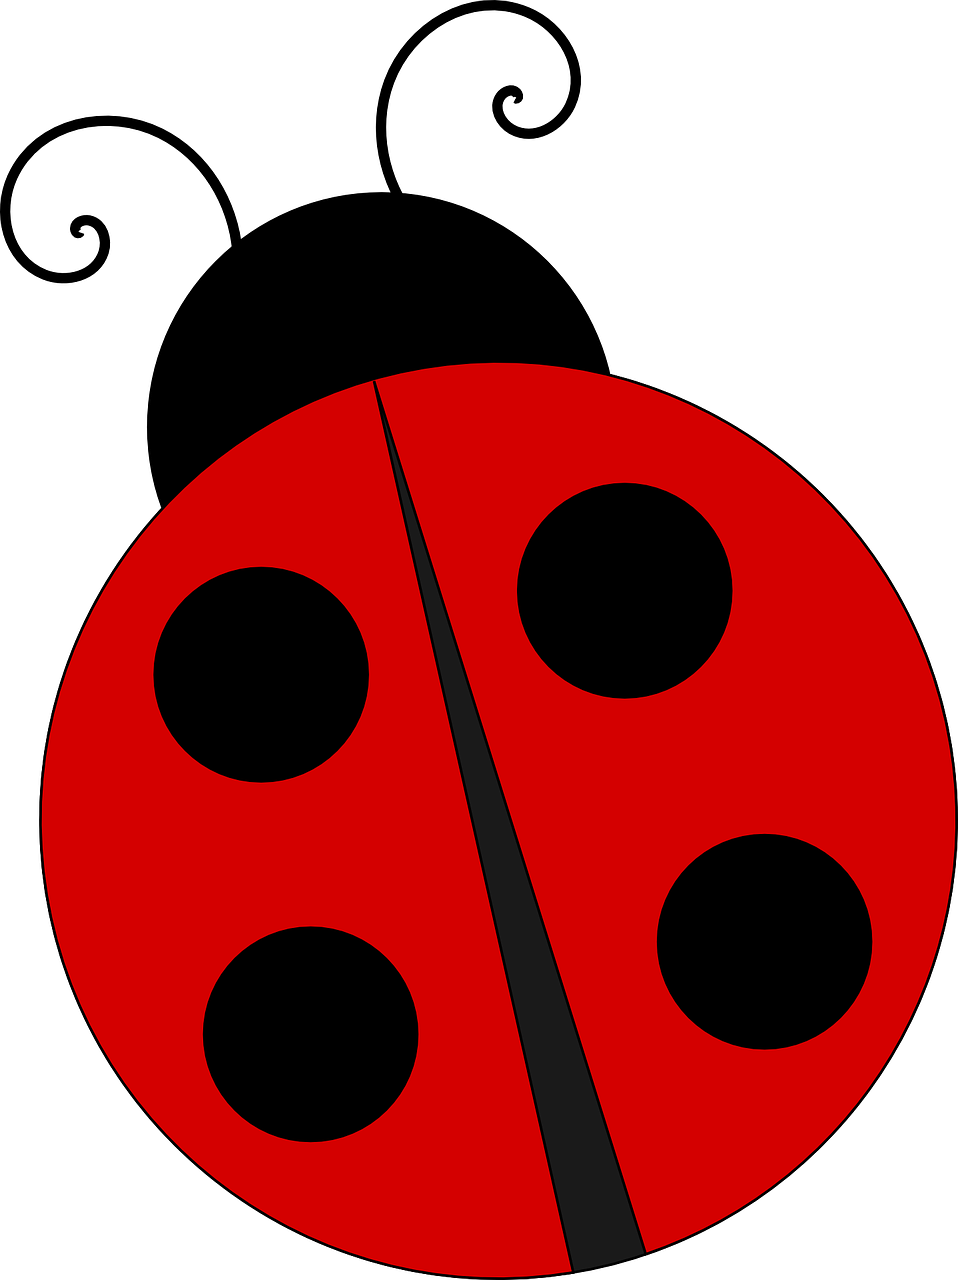 Ladybug Insect Vector Free Clipart HD PNG Image